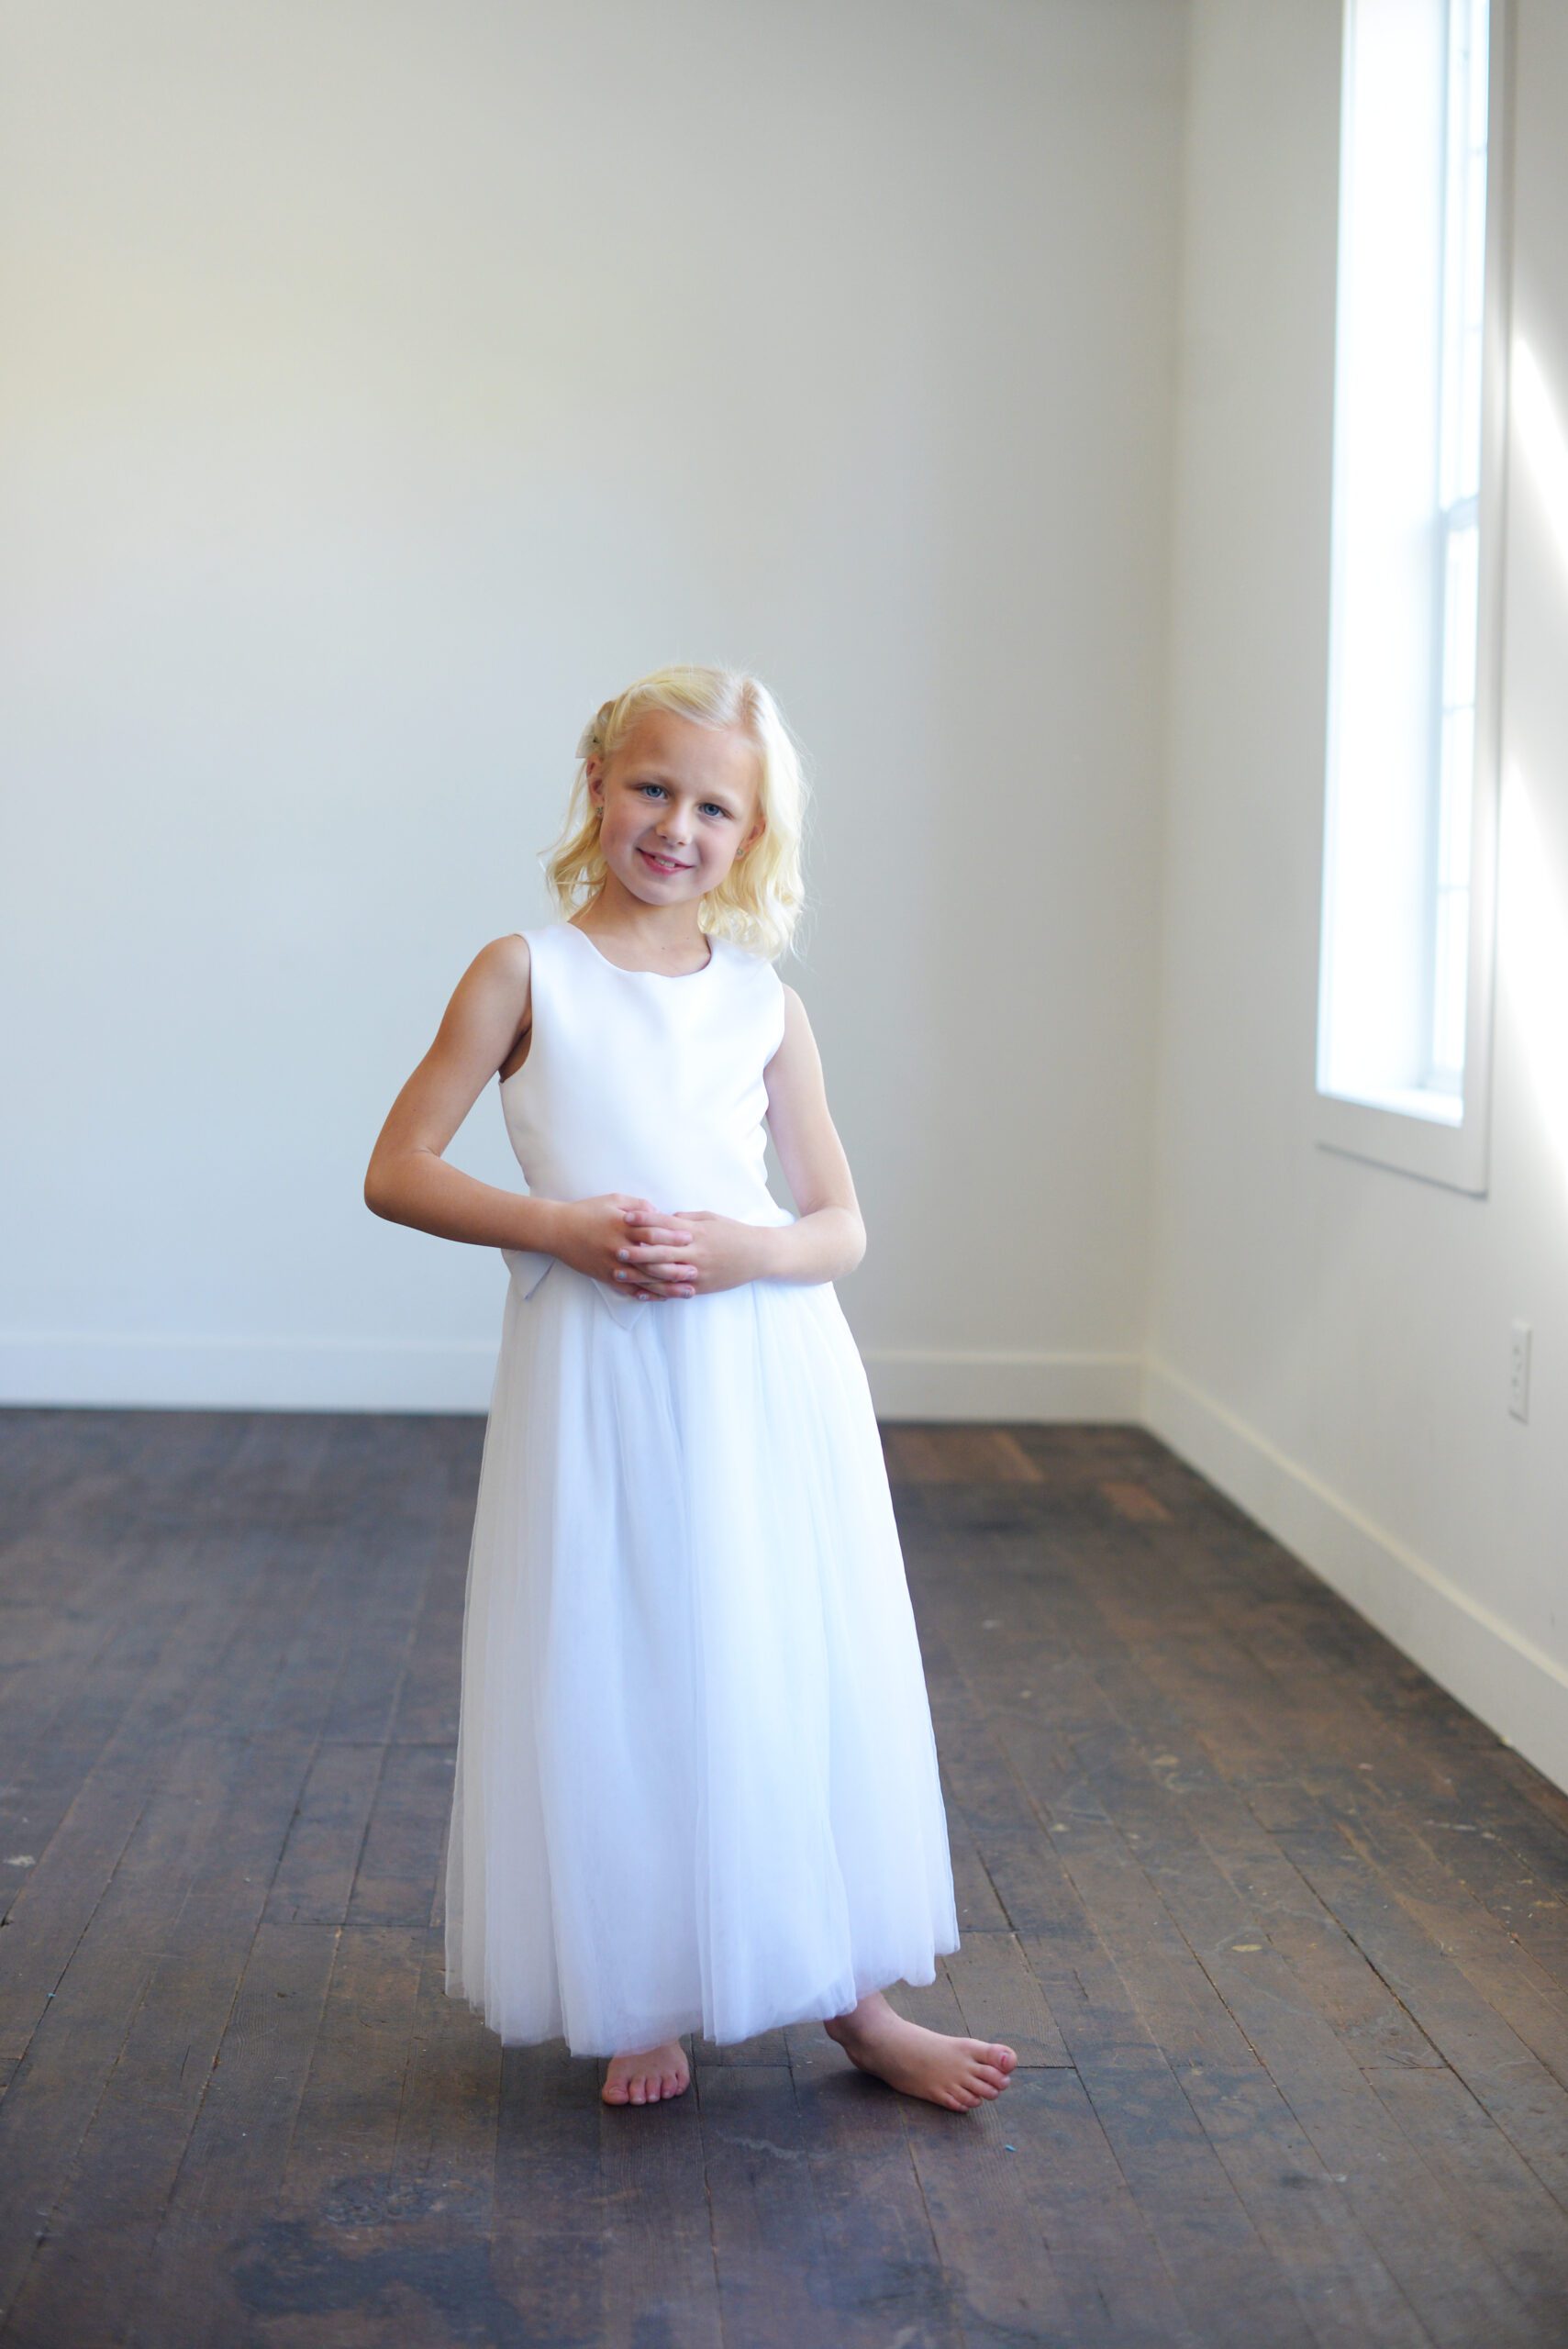 A photo of an 8 year old girl wearing a white satin first communion dress with an oversized bow and diamante